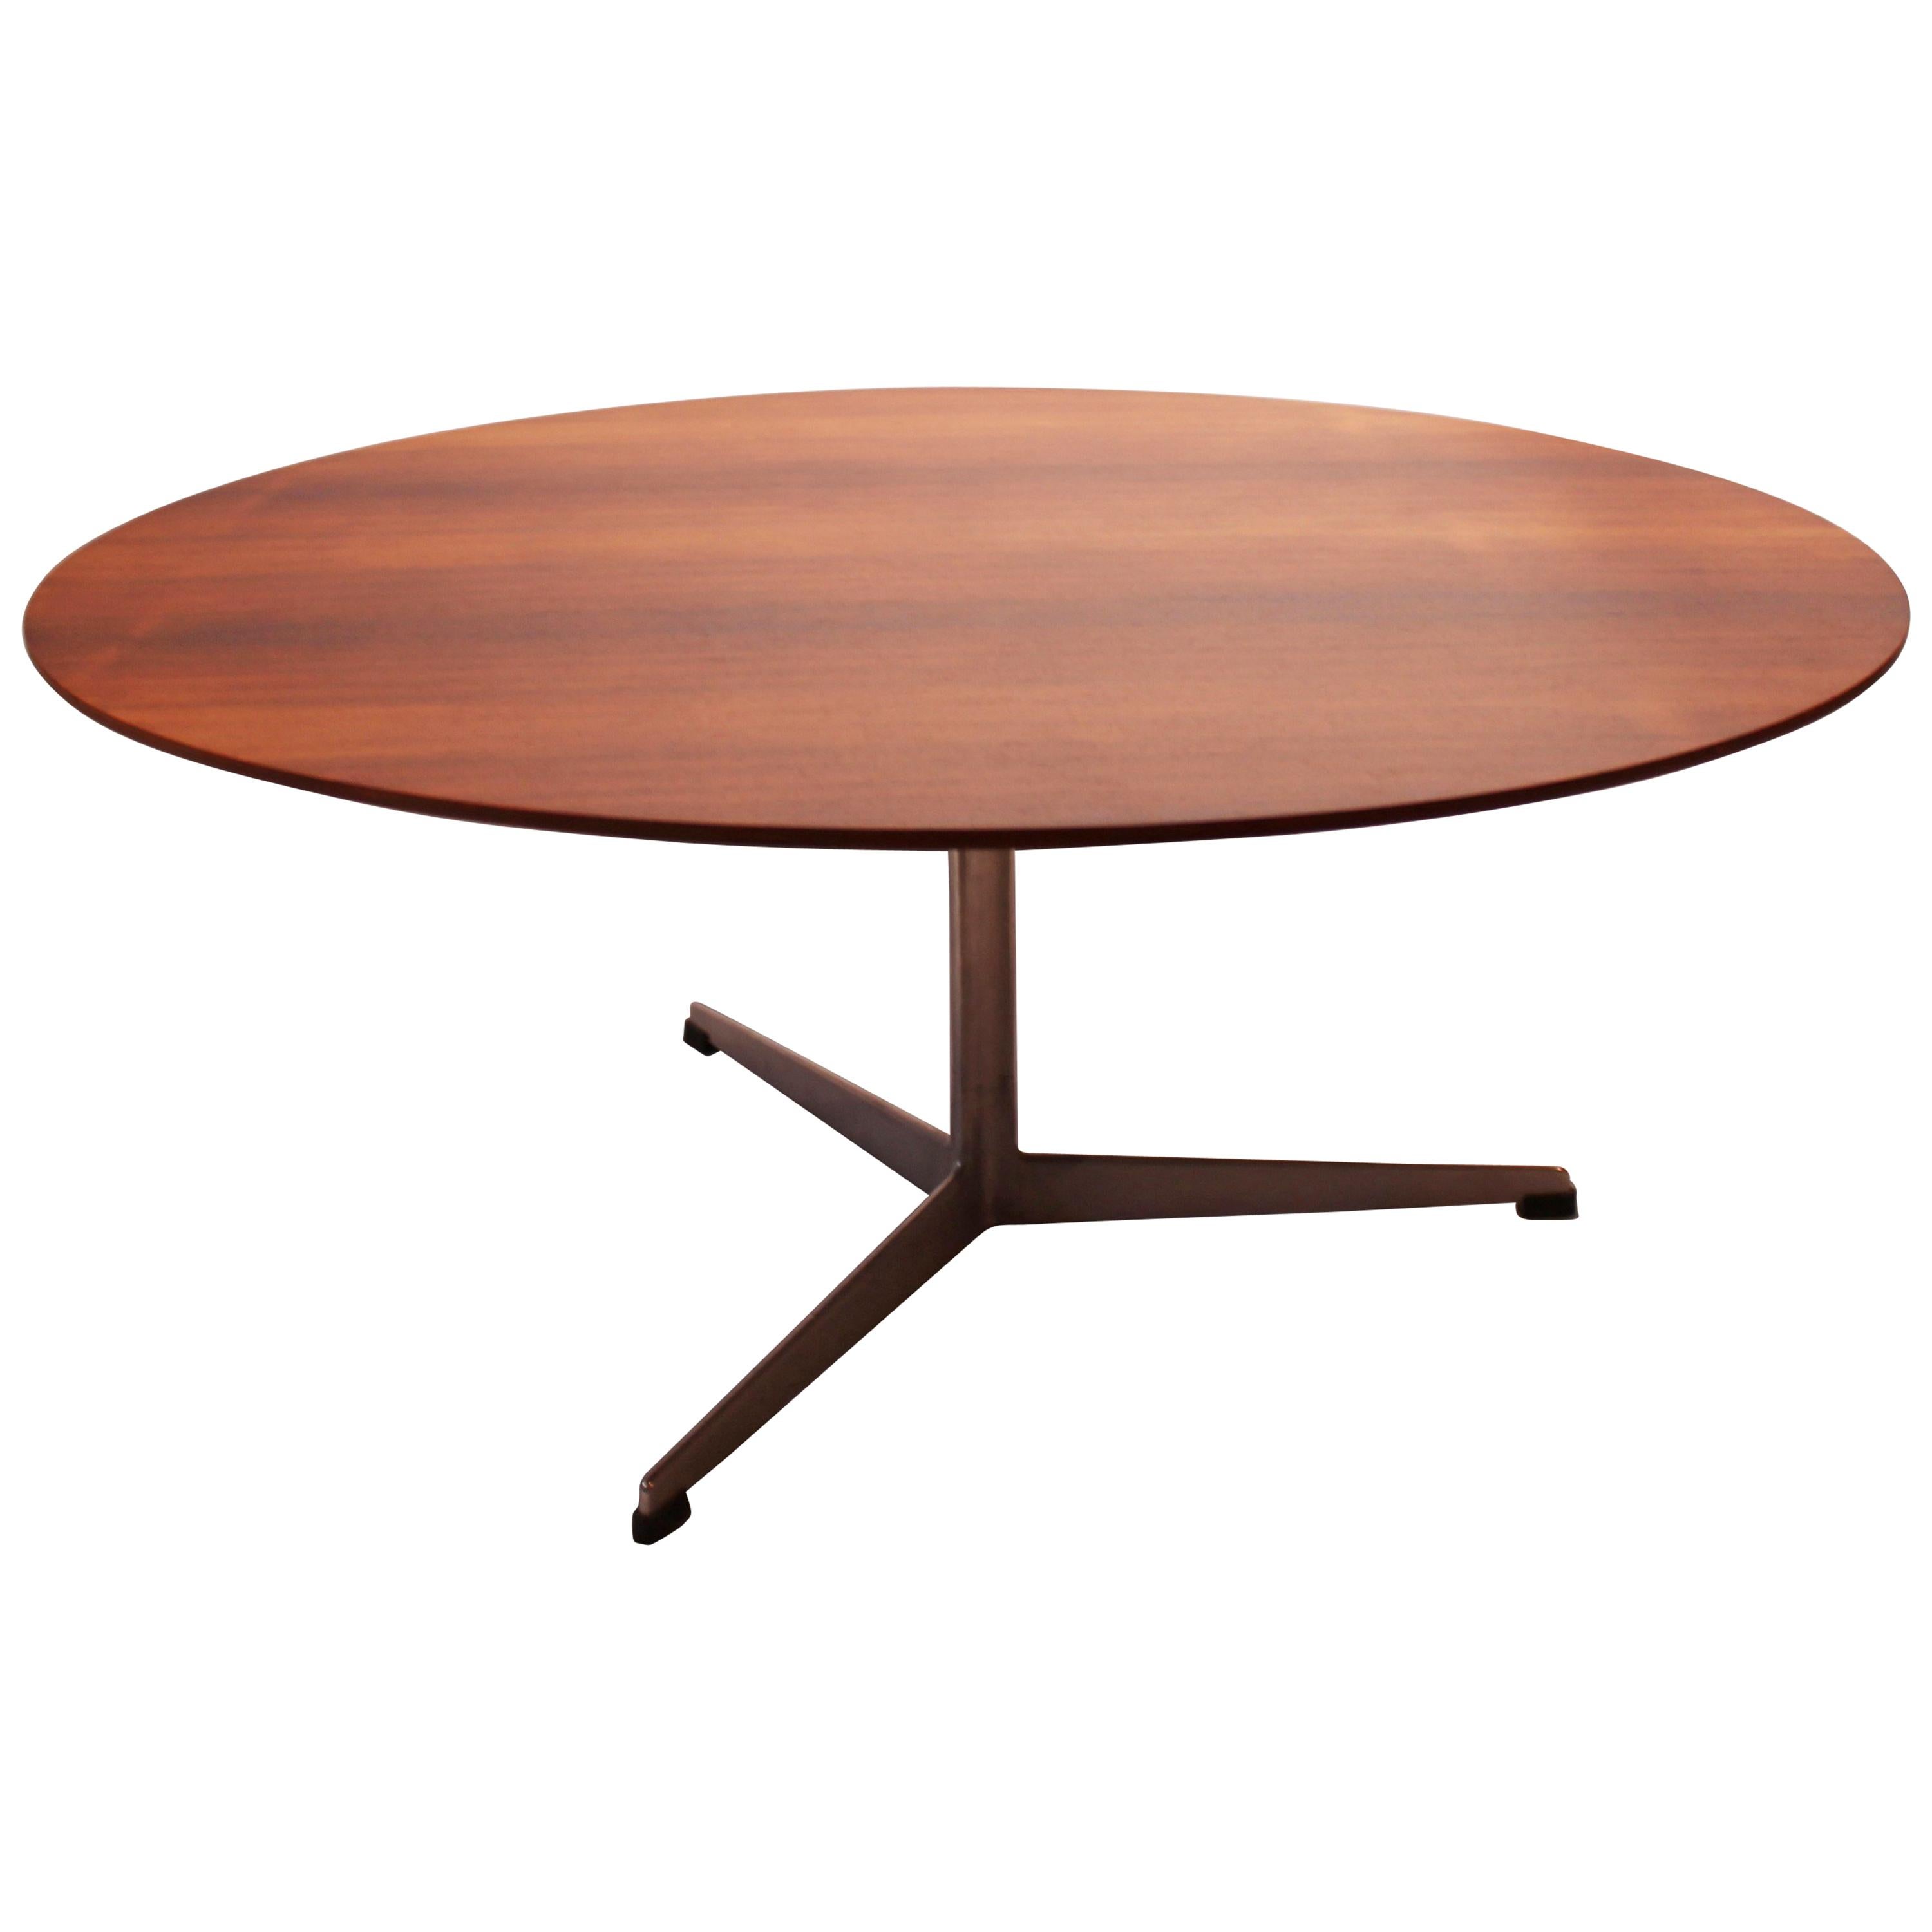 Round Coffee Table, Model 3513, Designed by Arne Jacobsen